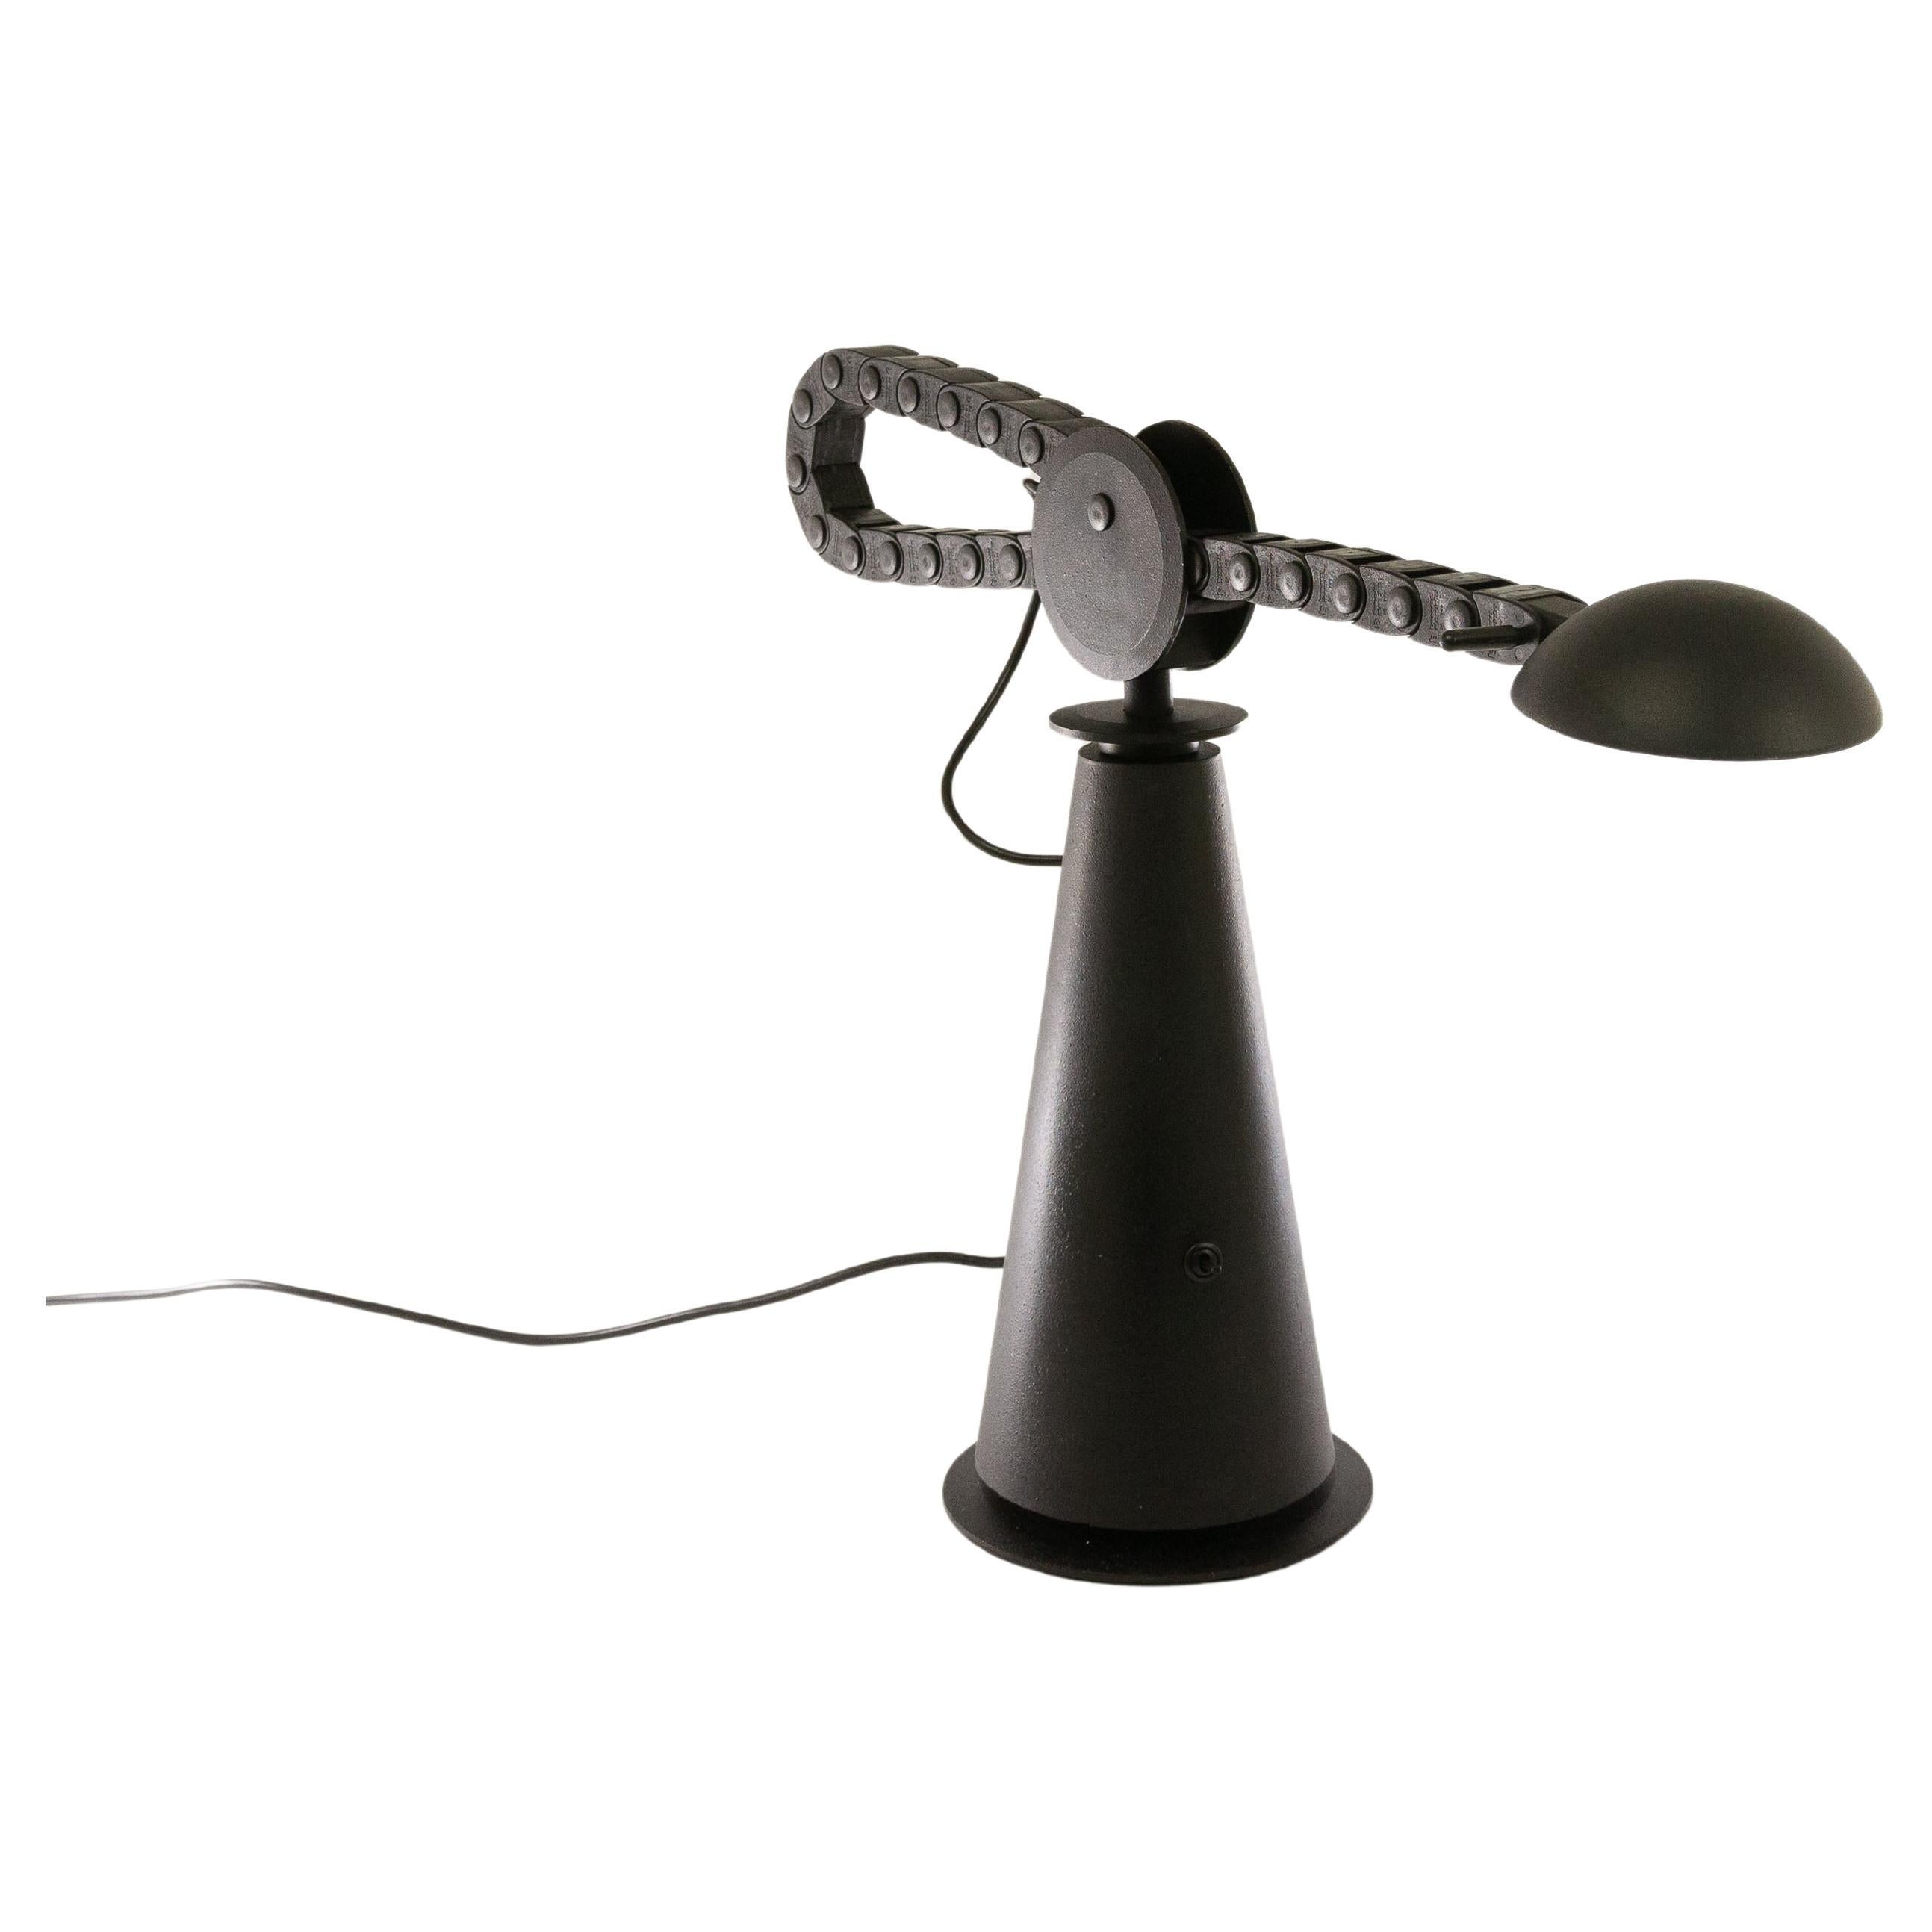 Gaucho Table Lamp Designed by Studio PER for Egoluce, 1980s For Sale